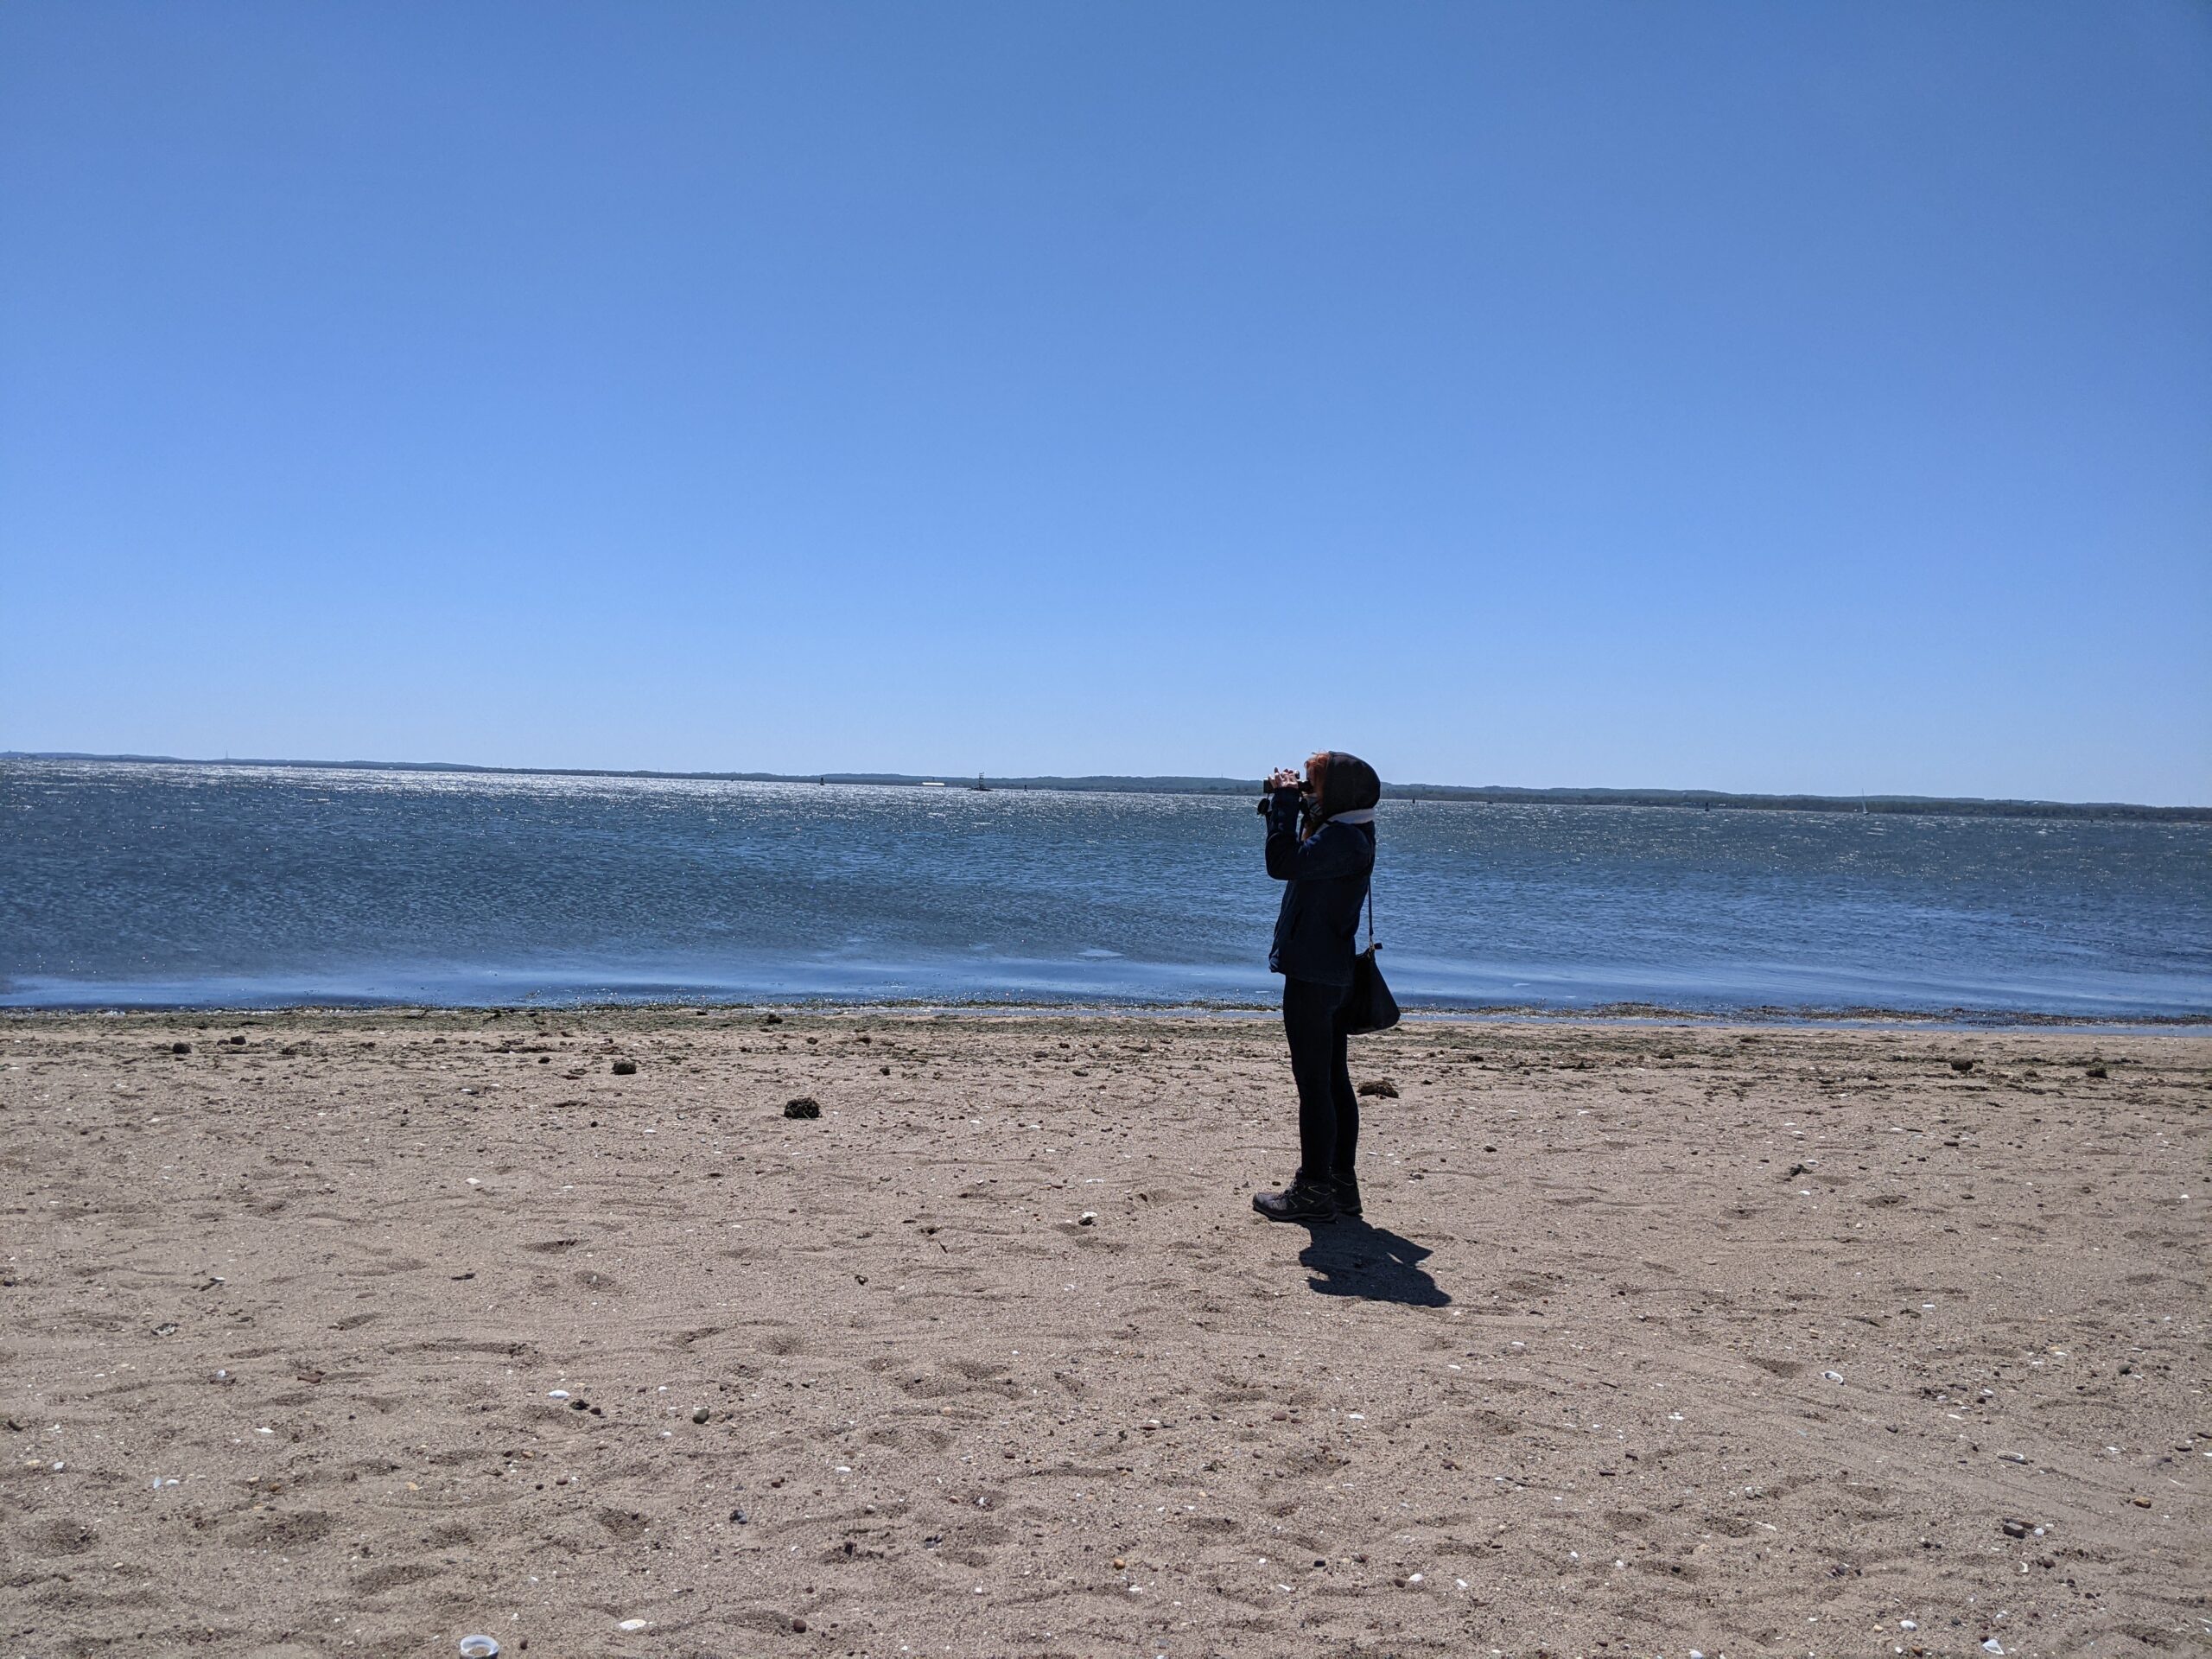 A person standing on a beach looking through binoculars with the water and blue sky behind them